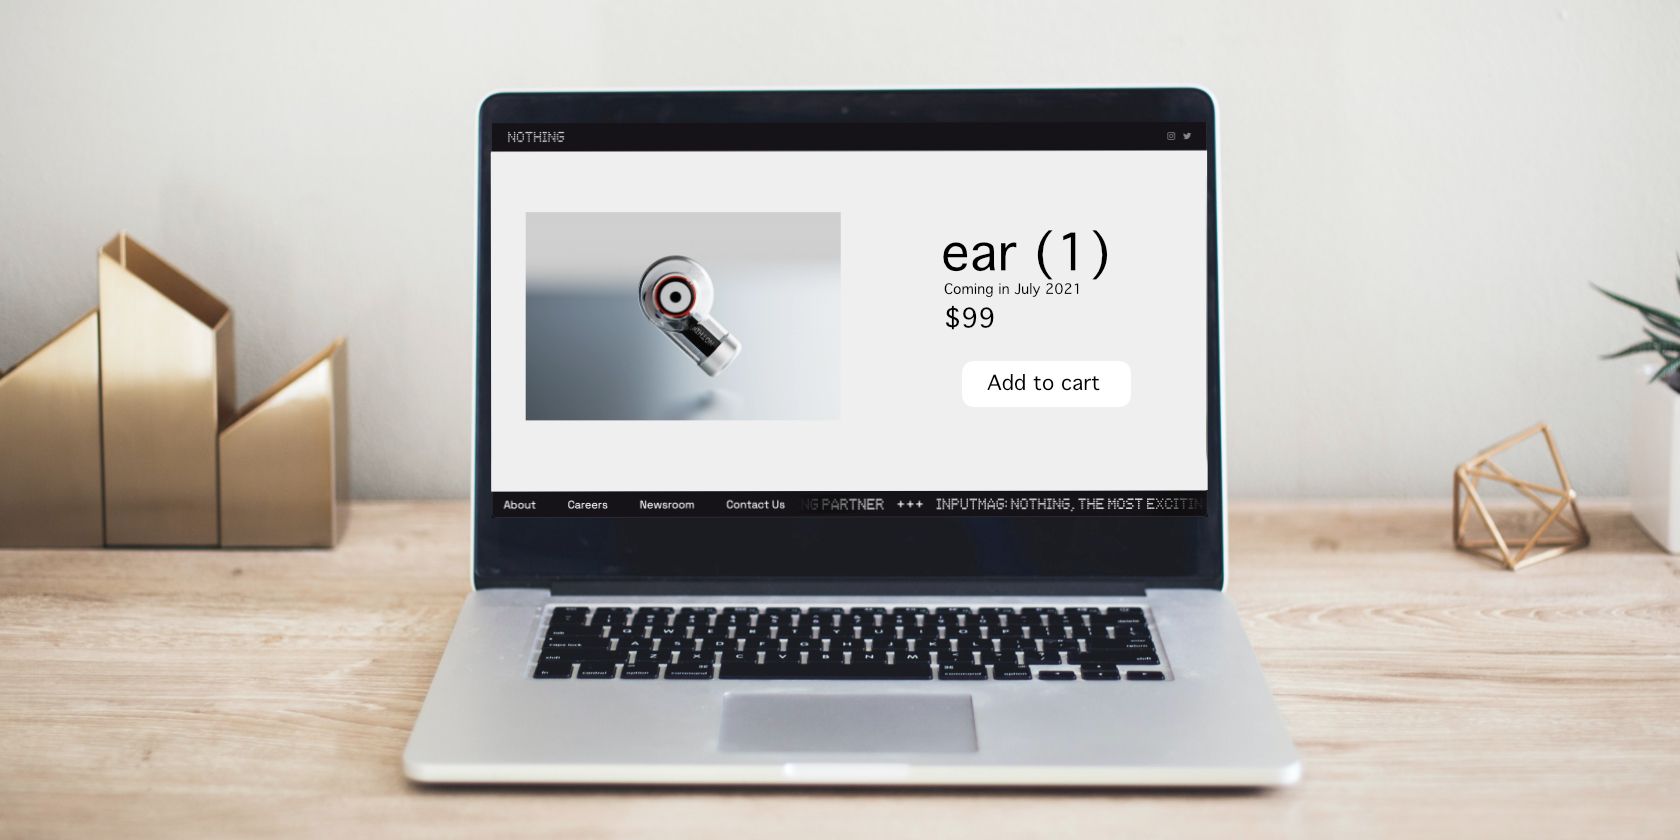 Conceptual design of Nothing's retail page for the ear (1) earbuds.